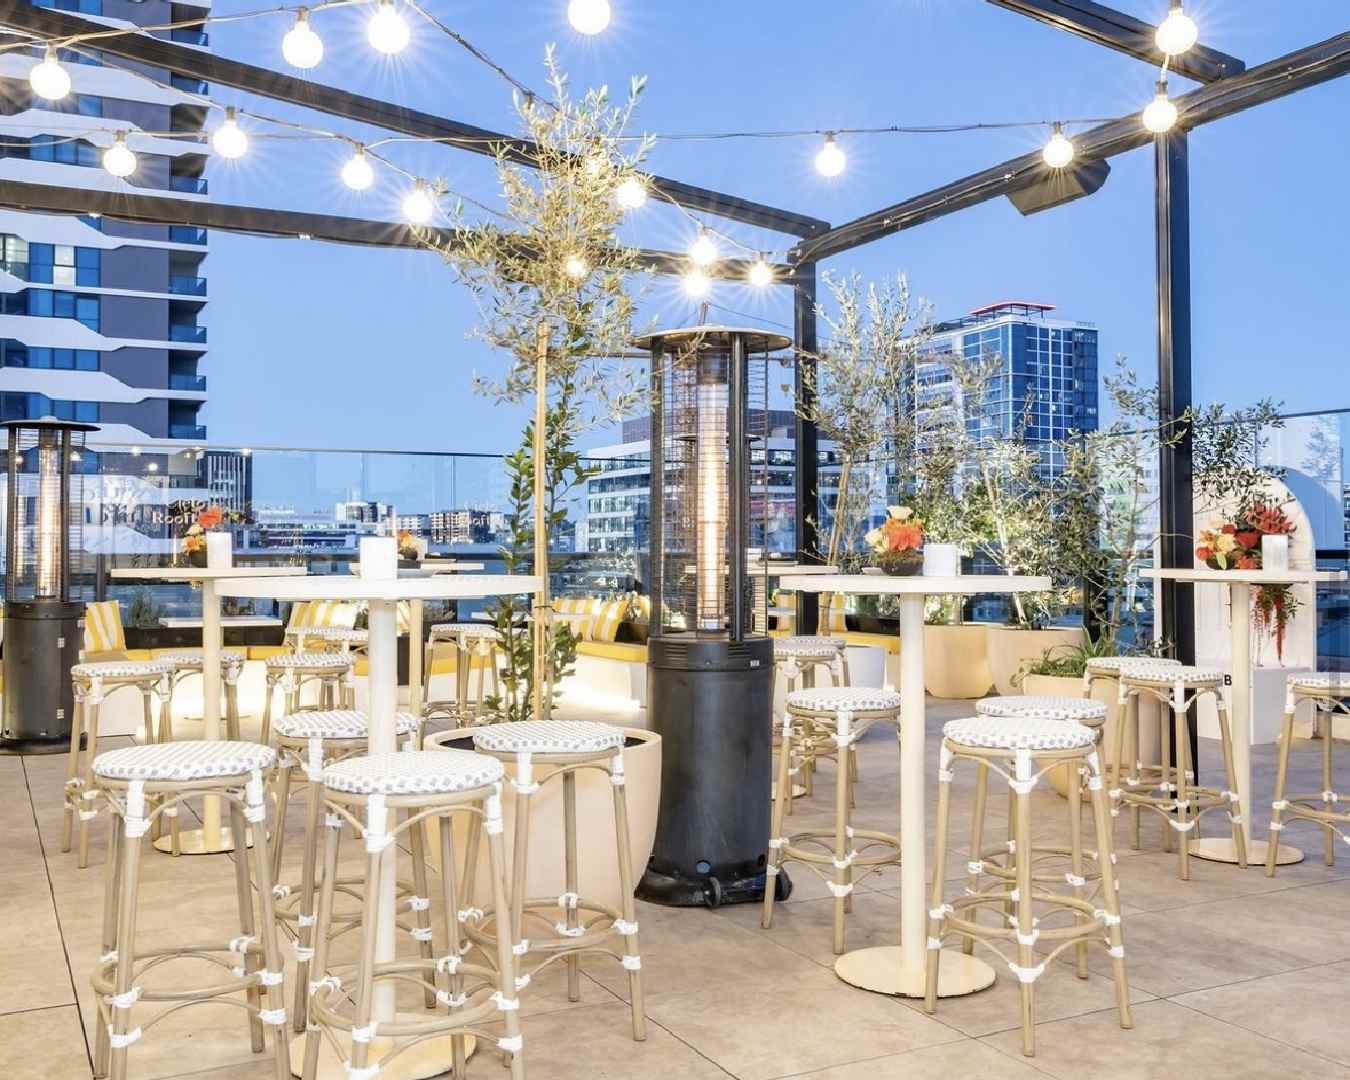 an outdoor seating area at brisbane cocktail bar Cielo